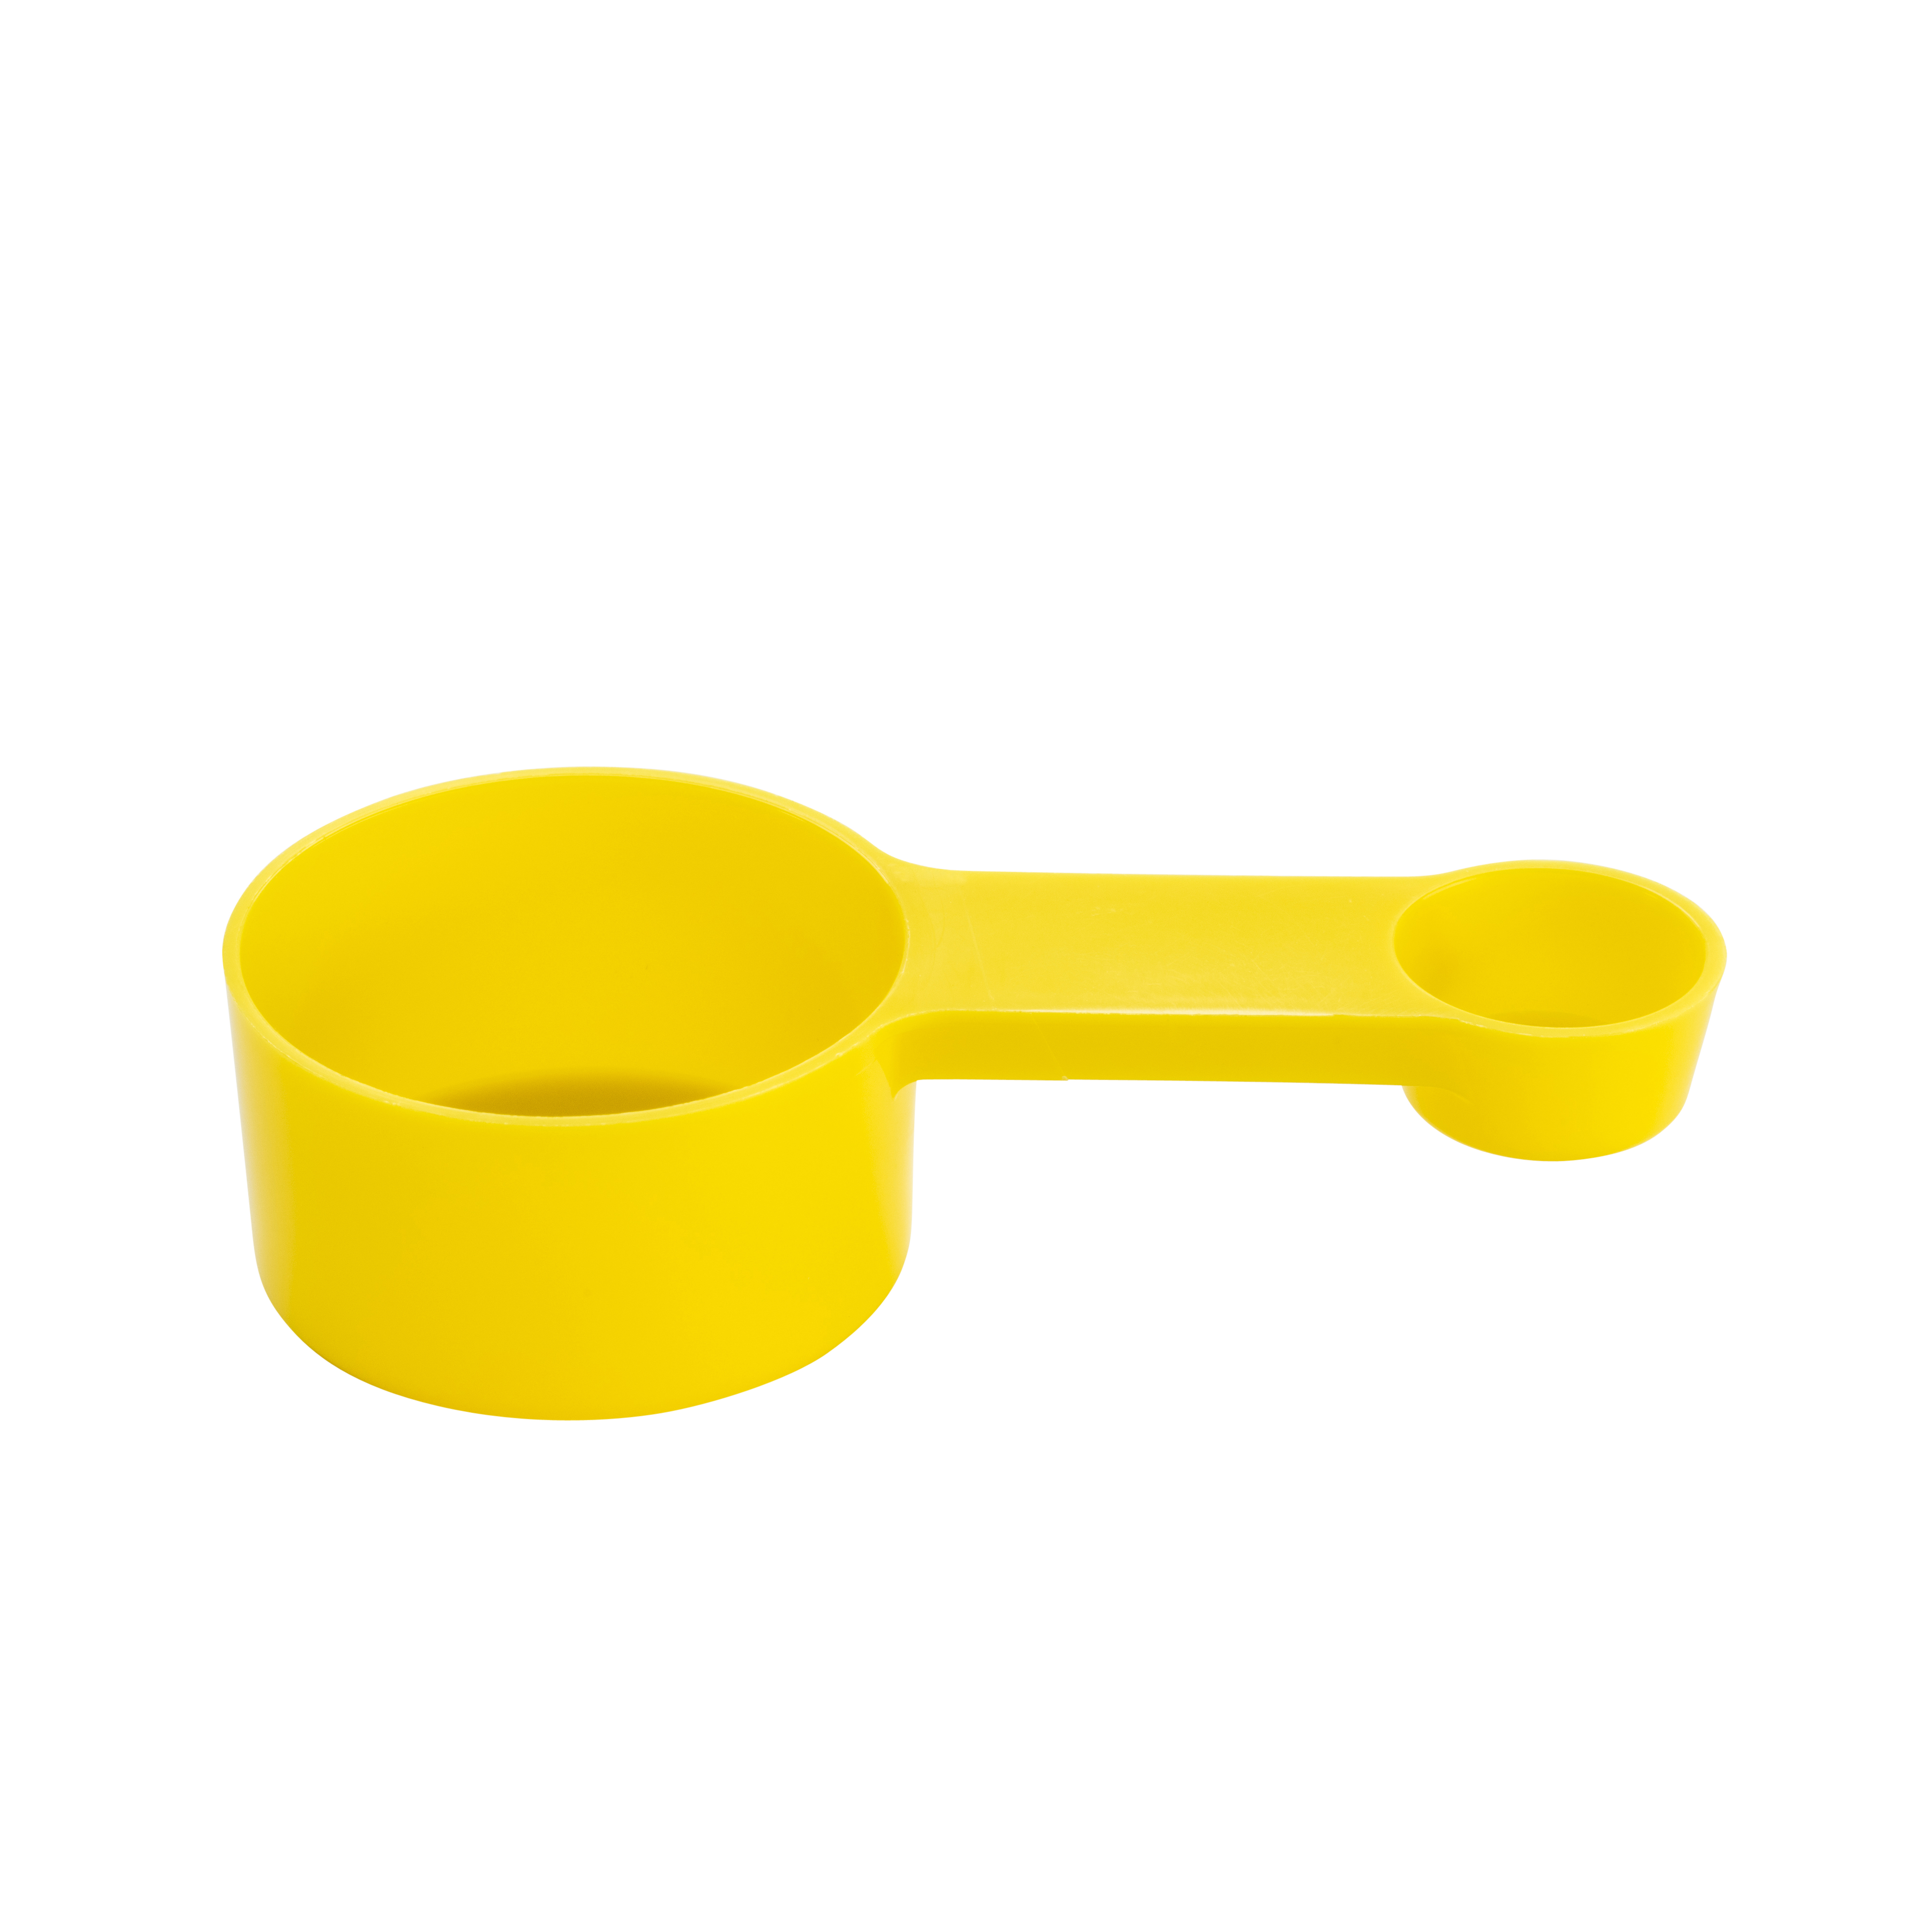 Yellow measuring cups